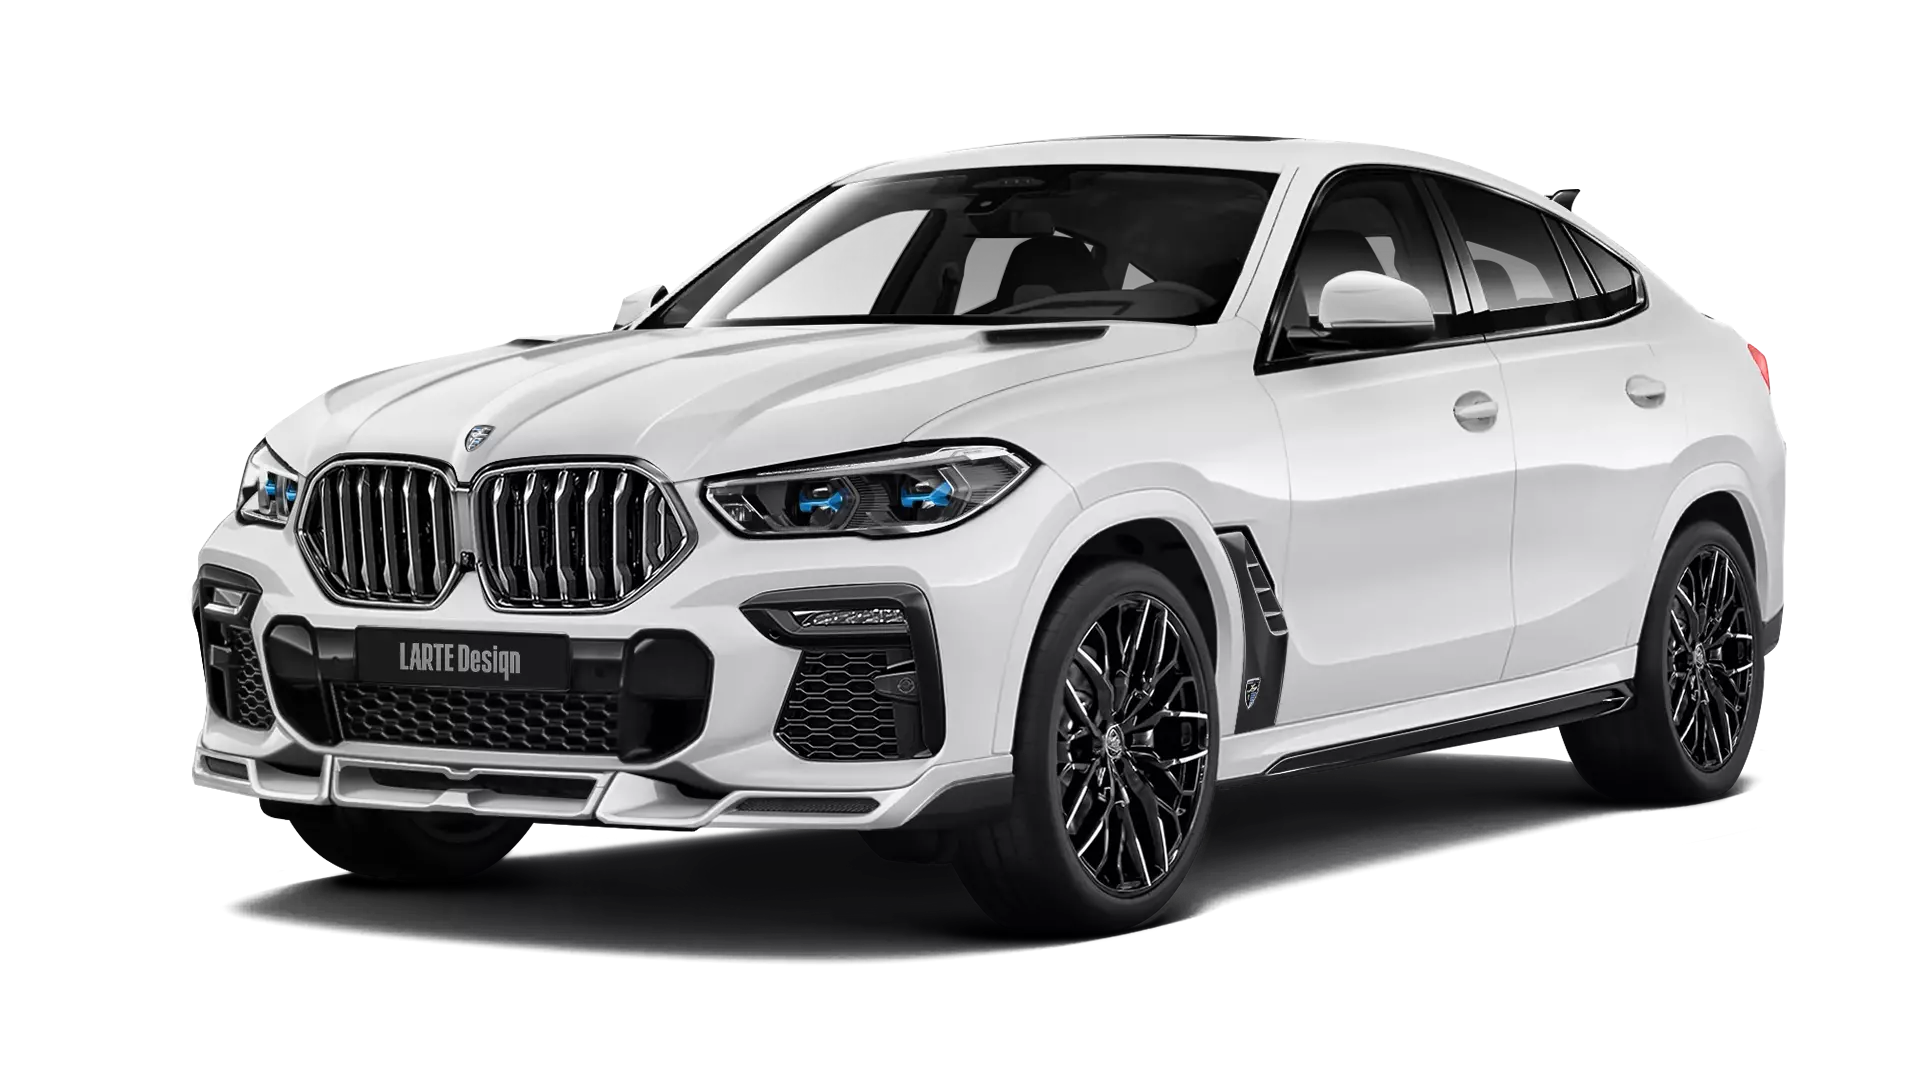 BMW X6 G06 with painted body kit: front view shown in Snow White